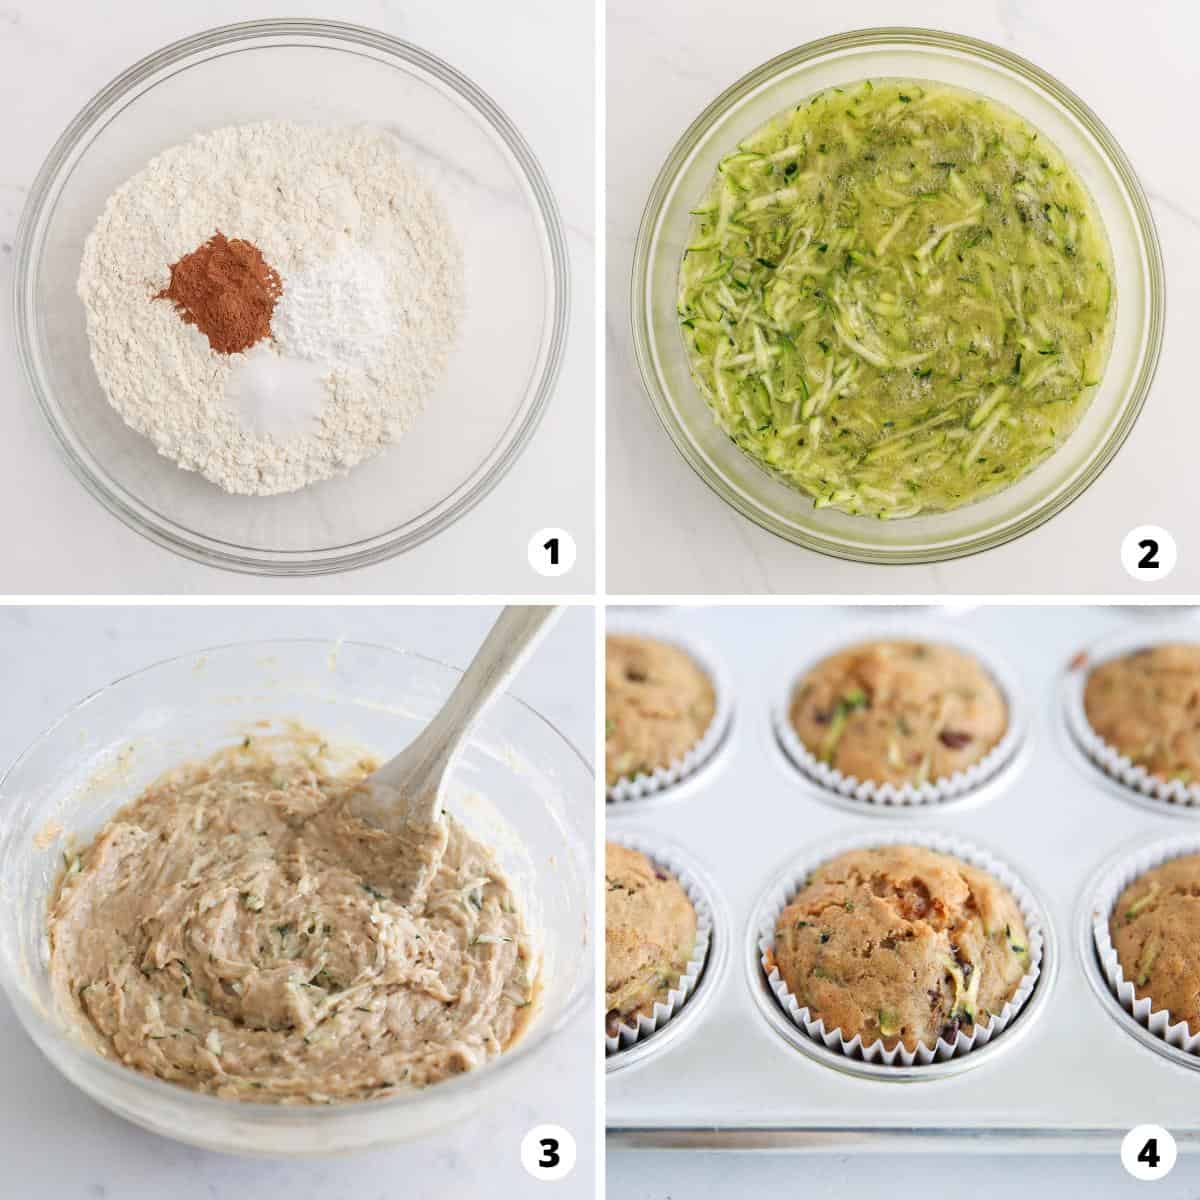 Showing how to make zucchini muffins in a 4 step collage.